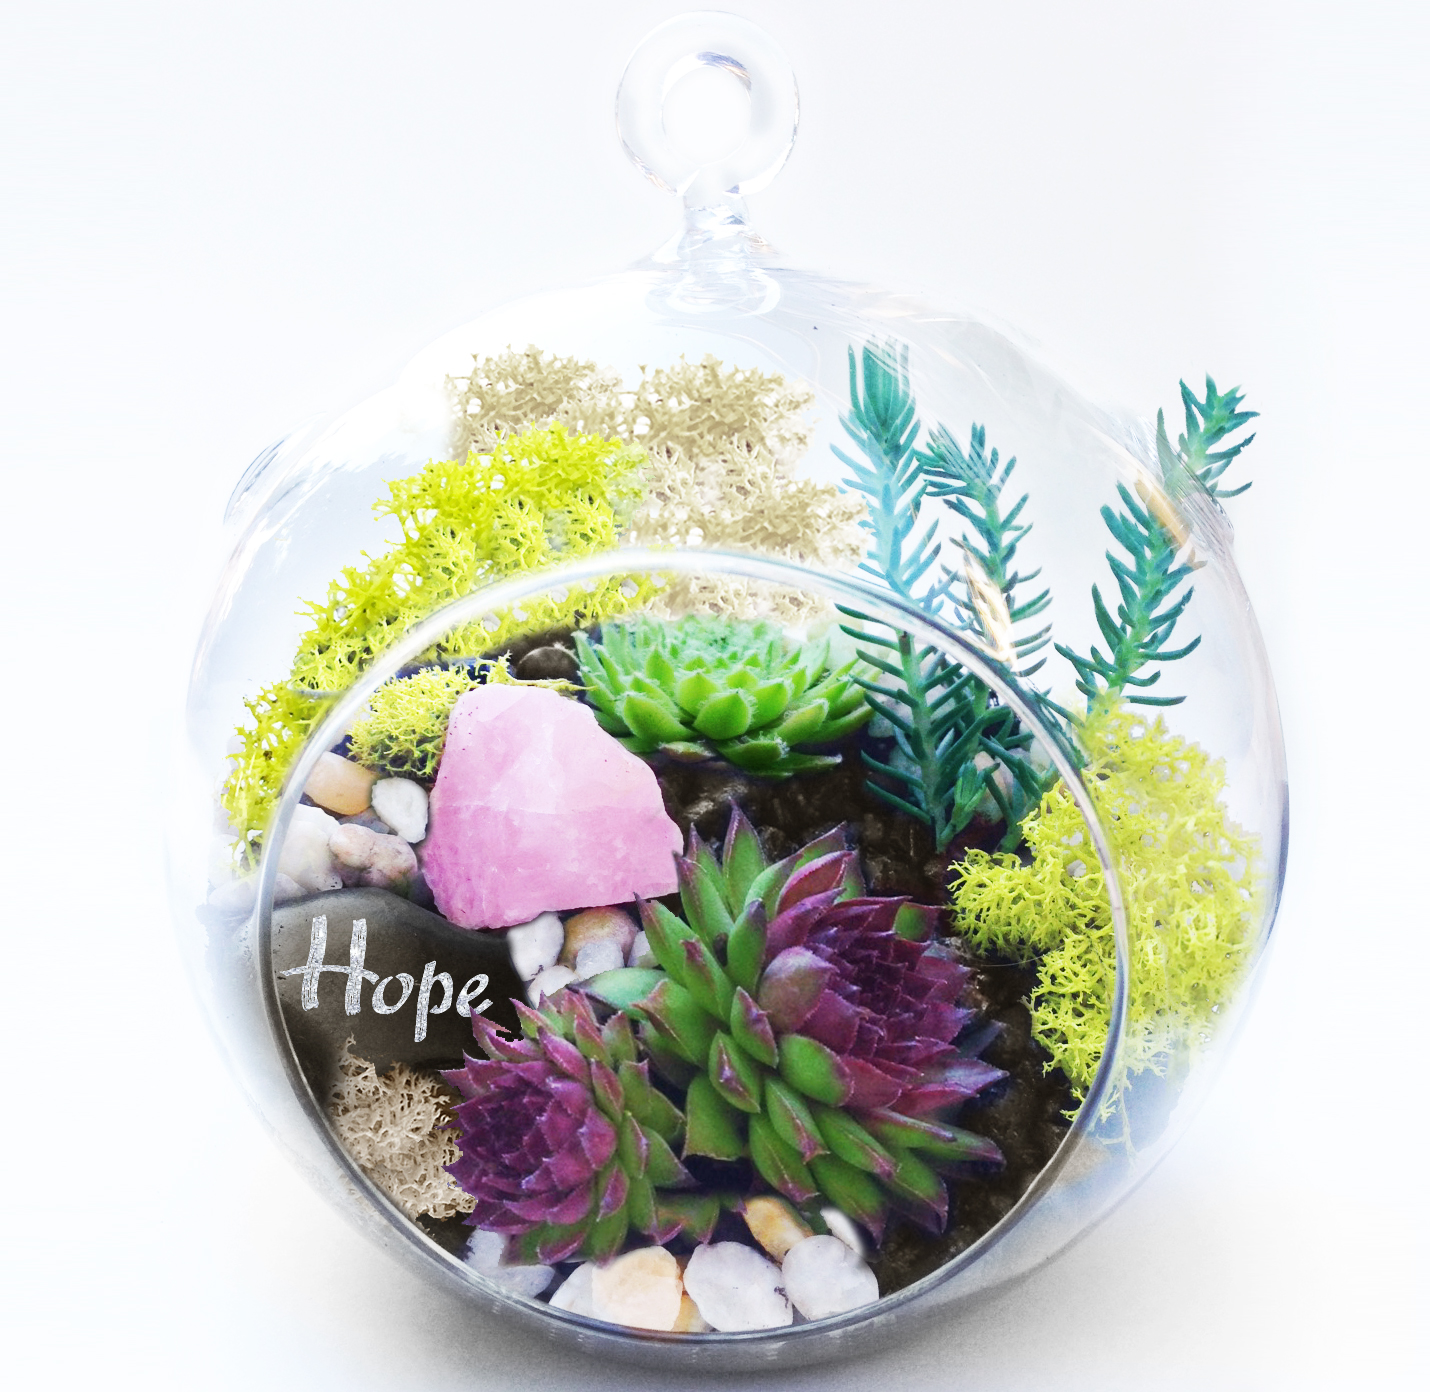 A Hanging Glass Globe Succulent Terrarium W Hope Wish Rock and Rose Quartz Crystal plant nite project by Yaymaker